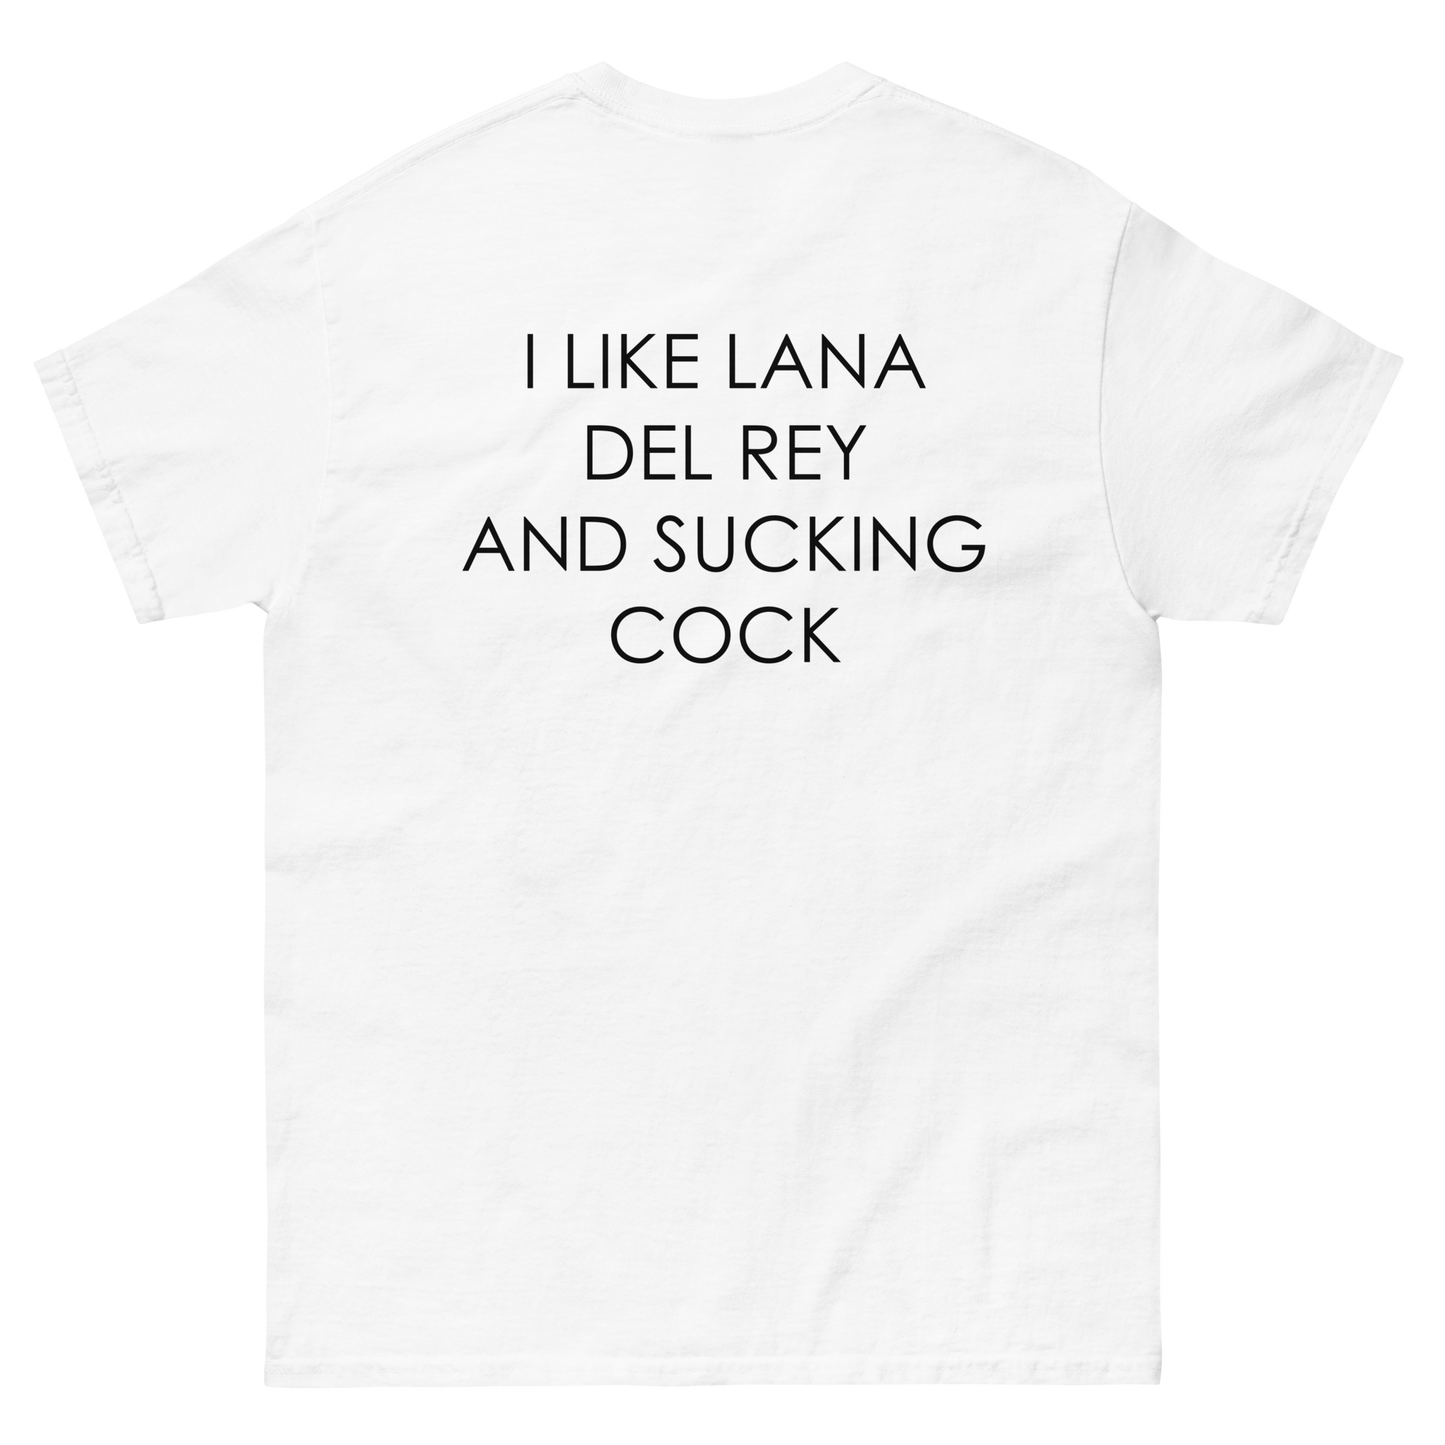 I Like Lana Del Rey And Sucking Cock.